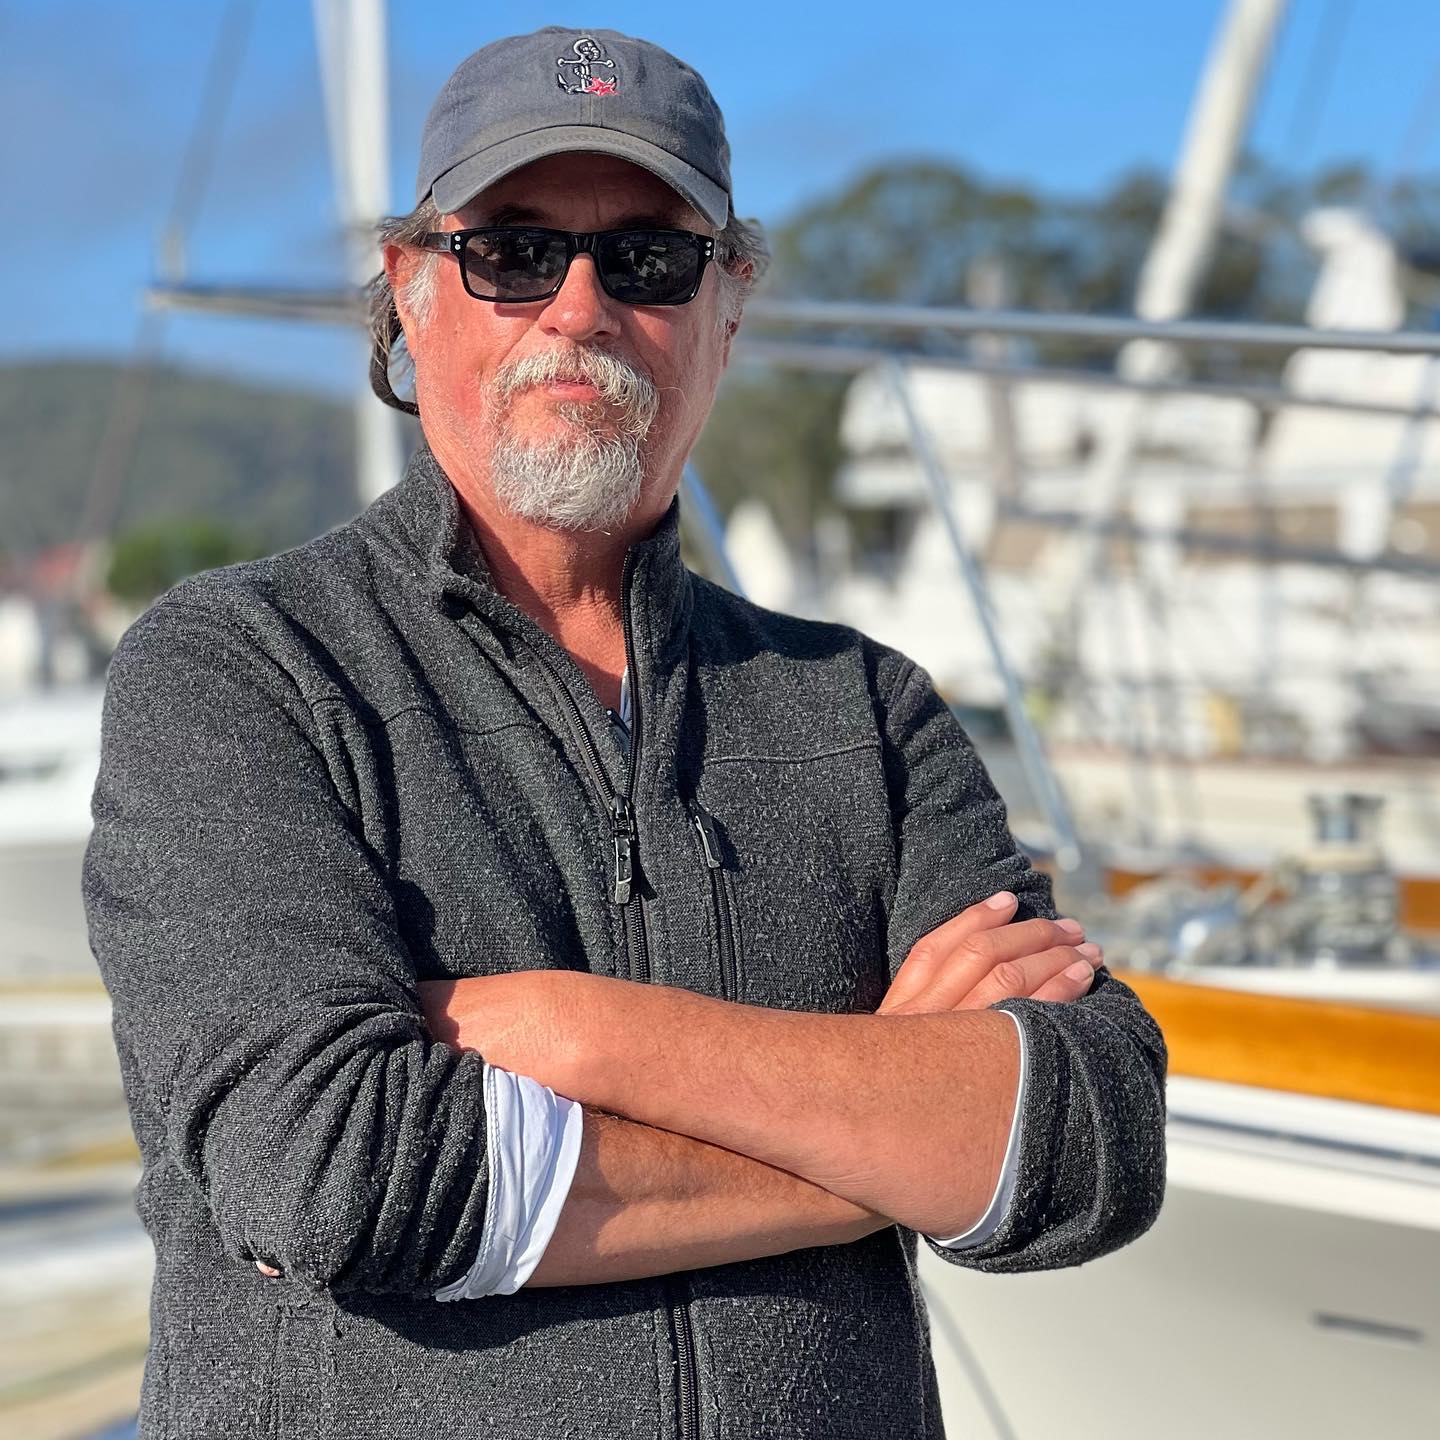 The mighty Bob Walden, skipper of Sea Star. Tied for 3rd place going into day 3 of 2022 Rolex Big Boat Series